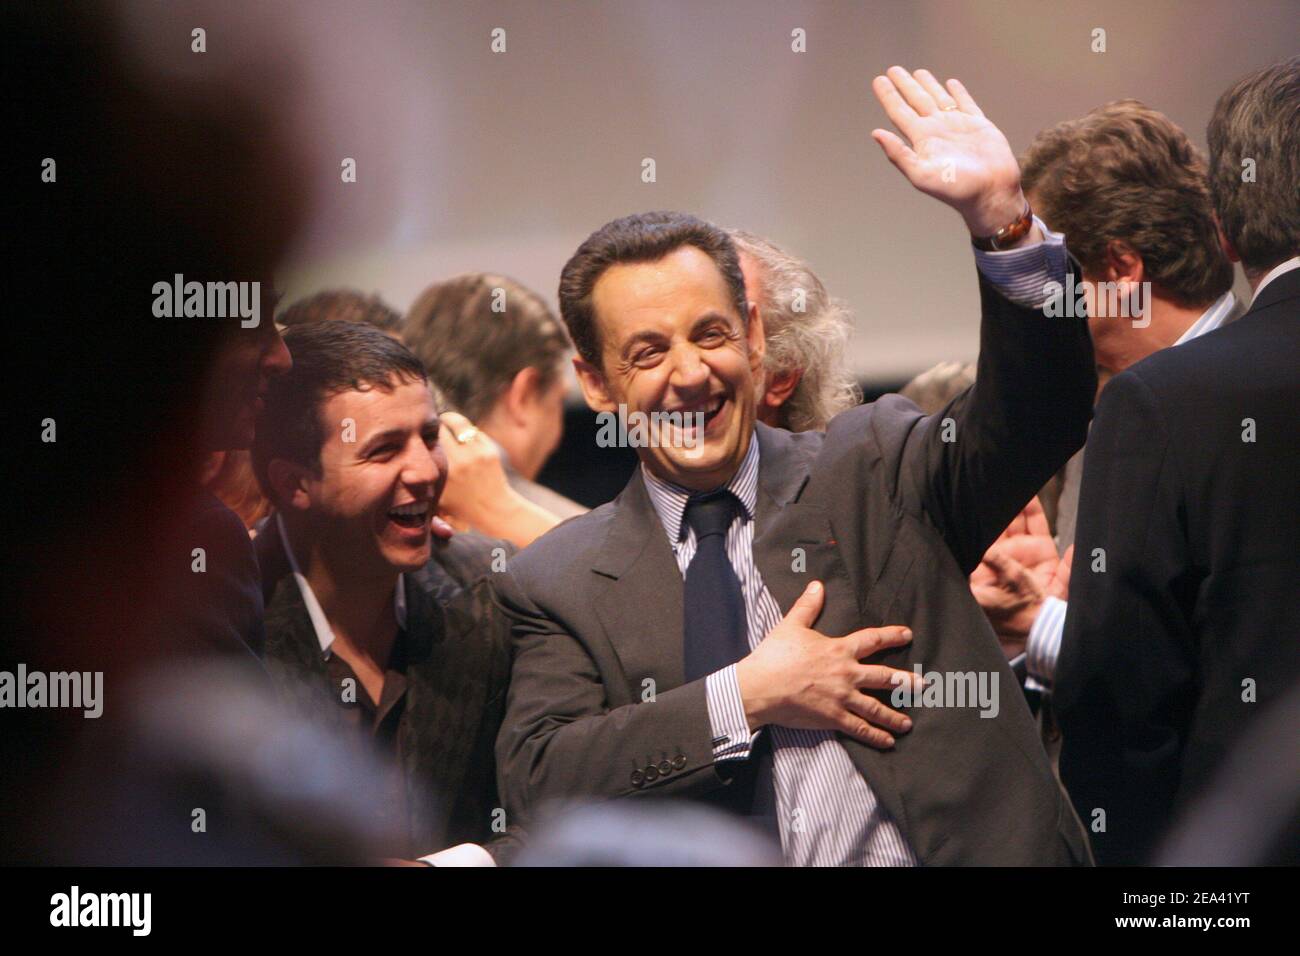 French singer Faudel and Governing UMP party president Nicolas Sarkozy attend a meeting of UMP party for the 'Yes' vote for the upcoming European Constitution referendum vote next May 29, at the Palais des Sports, in Paris, France, on May 12, 2005. Photo by Mousse/ABACA. Stock Photo